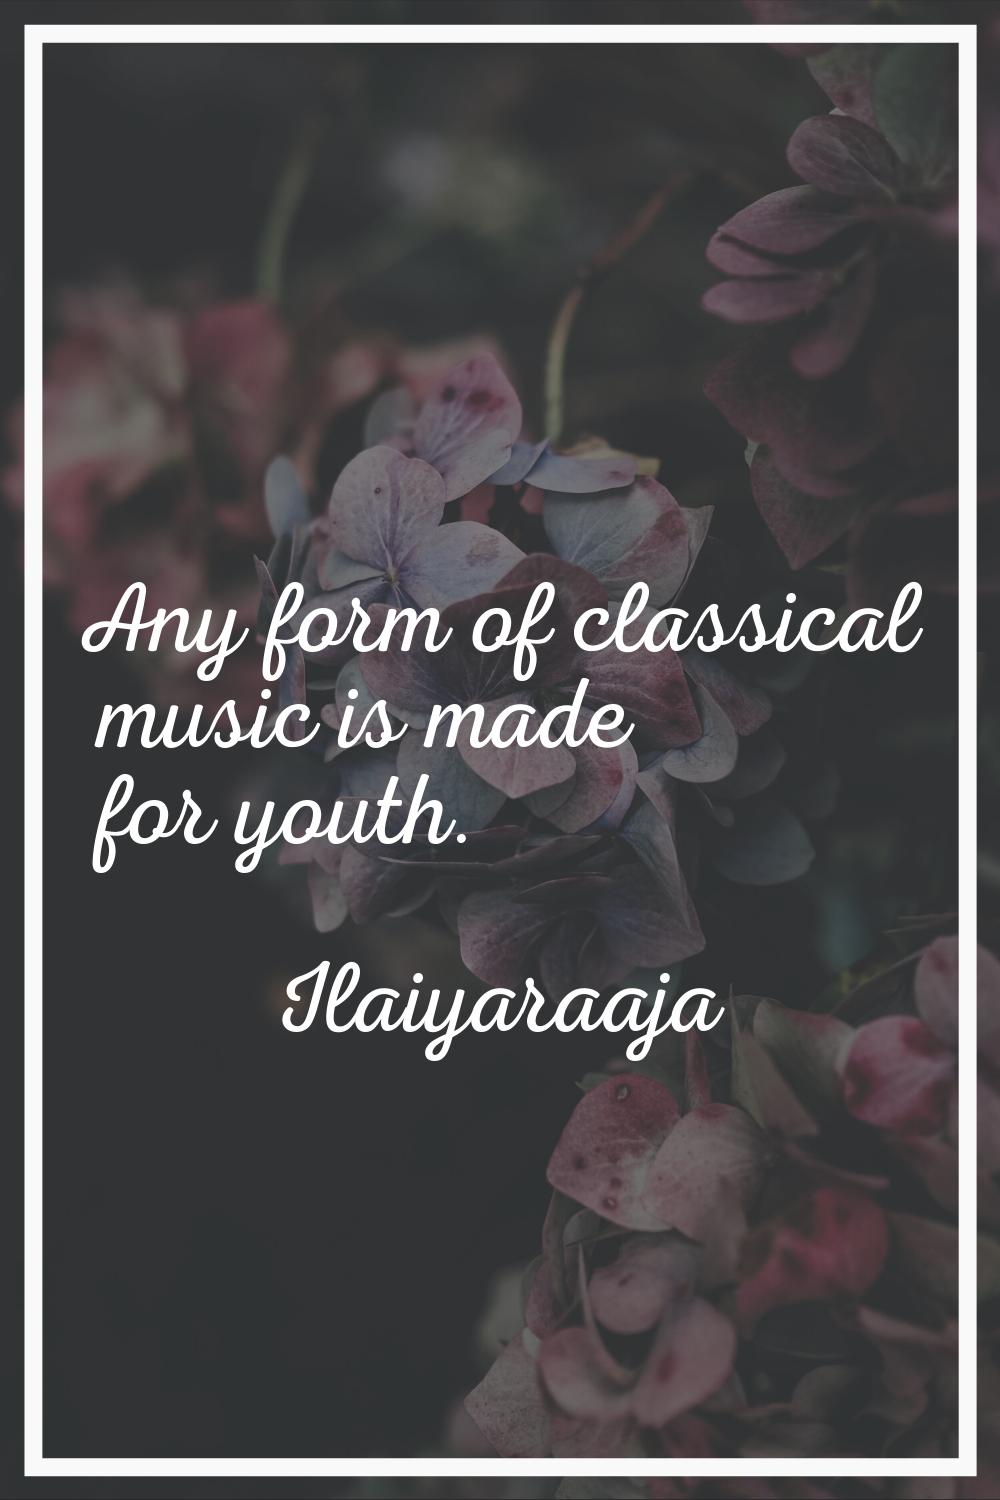 Any form of classical music is made for youth.